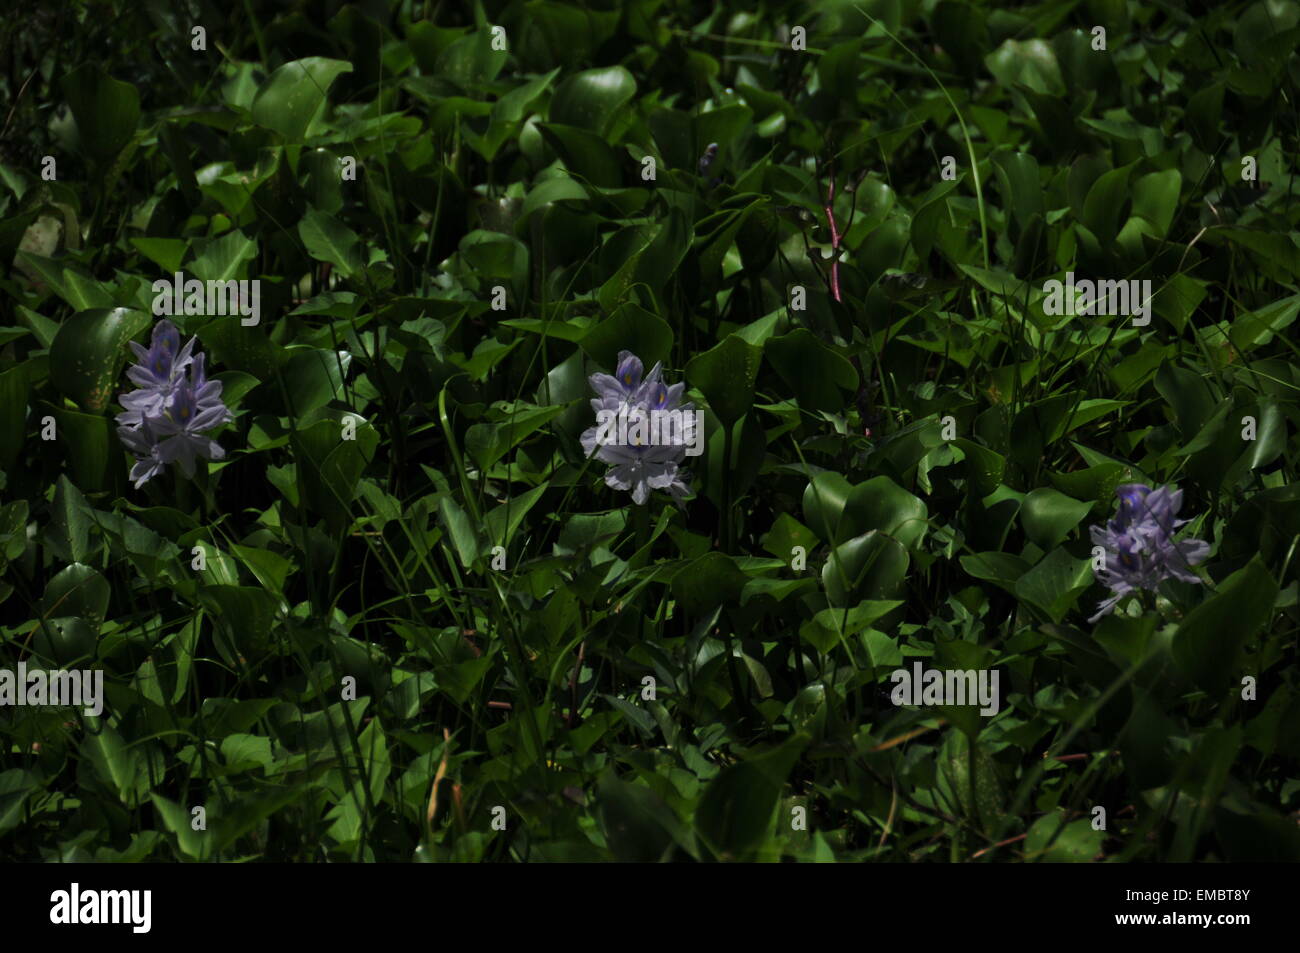 Three Violet Hyacinth flower with thick green background. Stock Photo